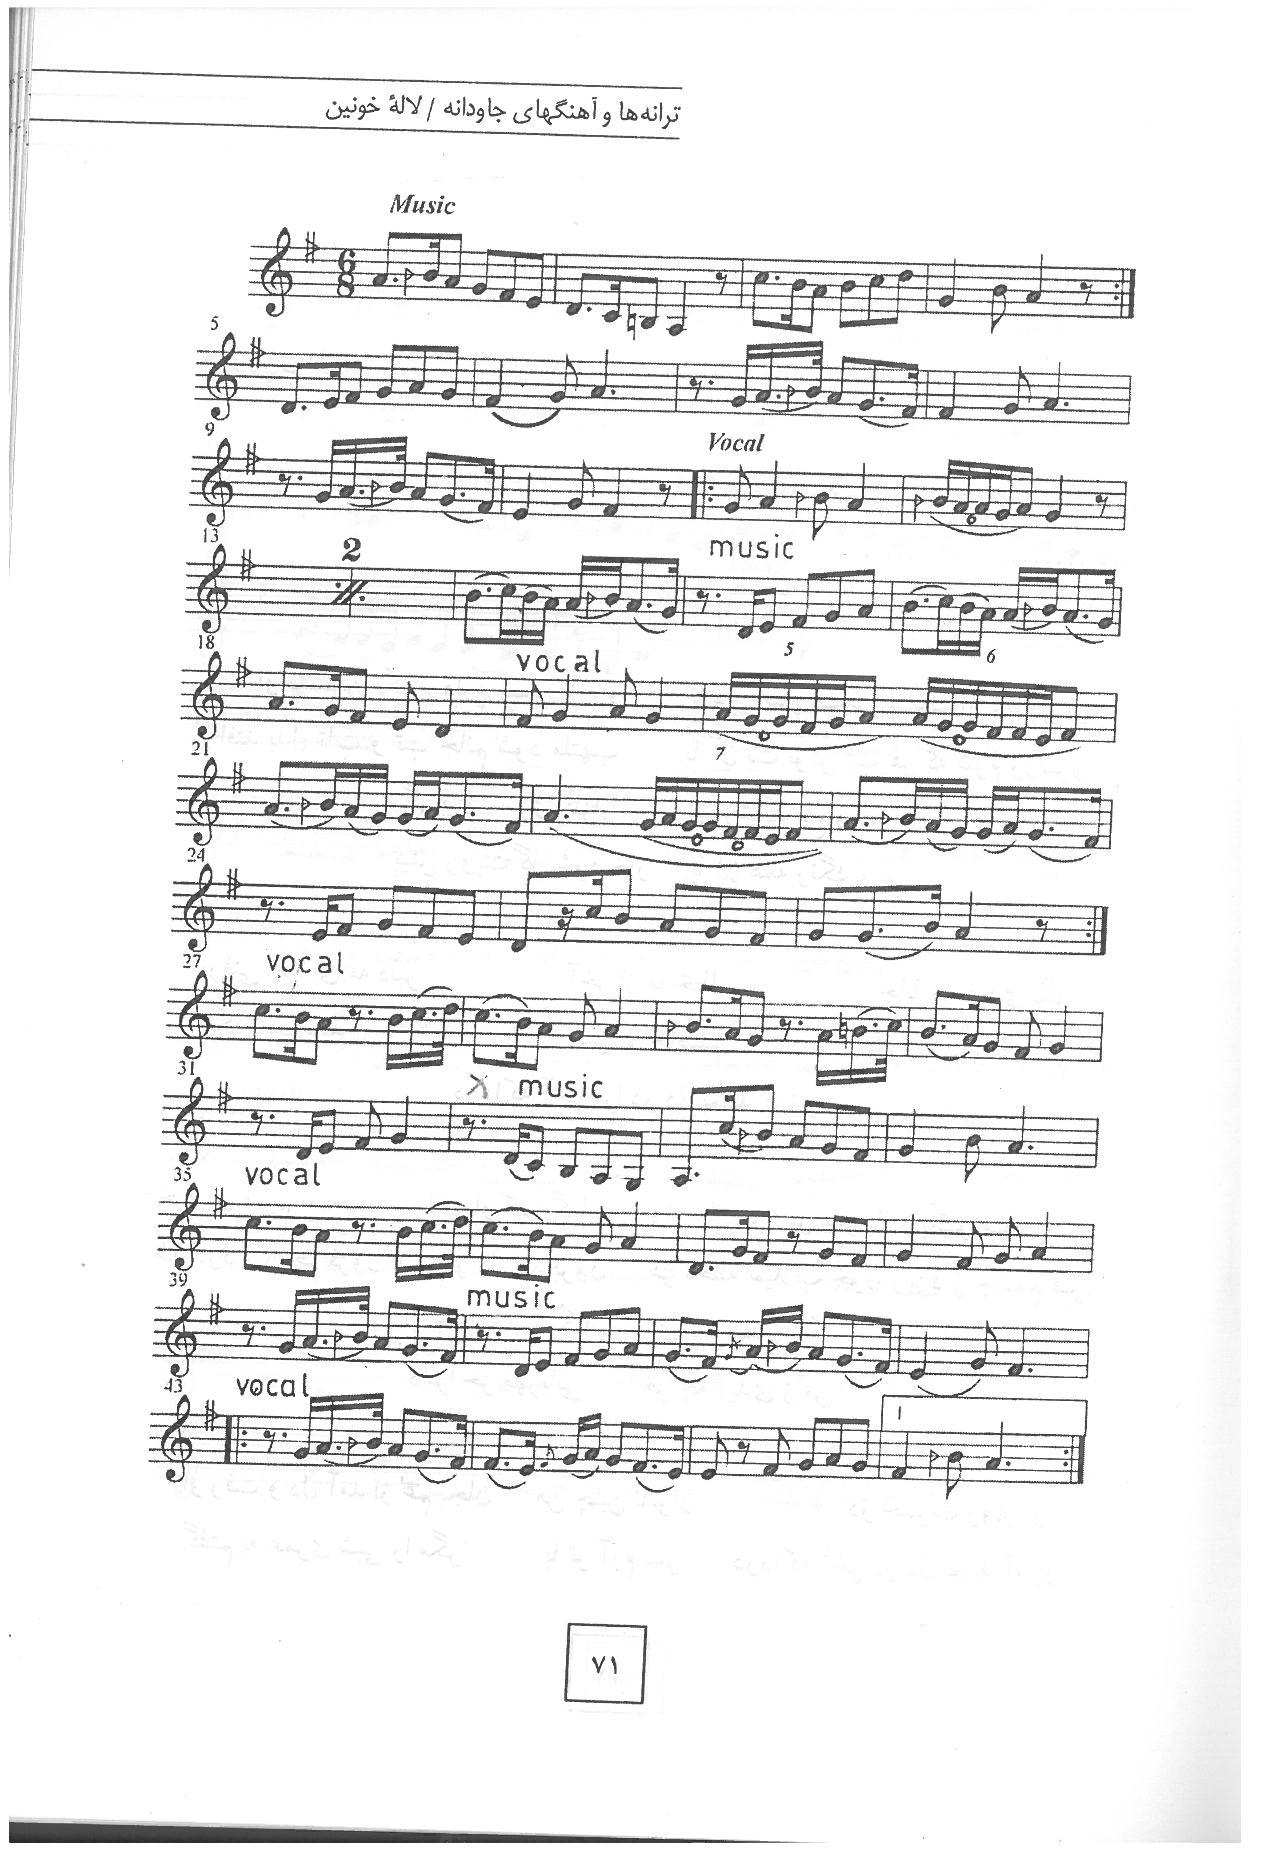 A sheet music page with many notes on it.